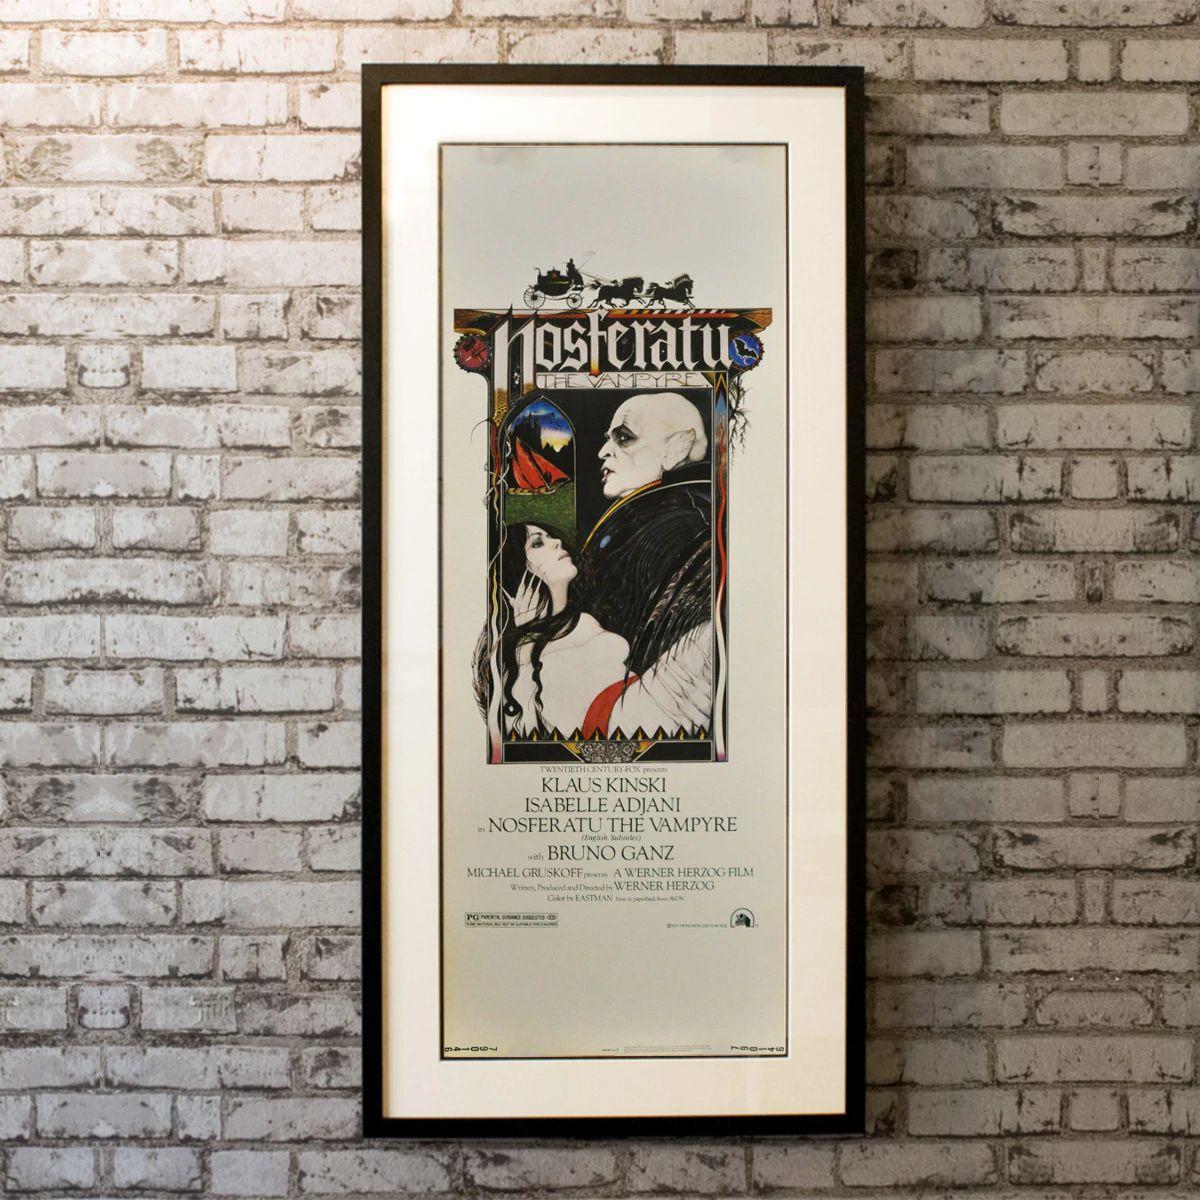 Nosferatu The Vampyre, Unframed Poster, 1979

US INSERT (14 X 36 Inches). Count Dracula moves from Transylvania to Wismar, spreading the Black Plague across the land. Only a woman pure of heart can bring an end to his reign of horror.

Year: